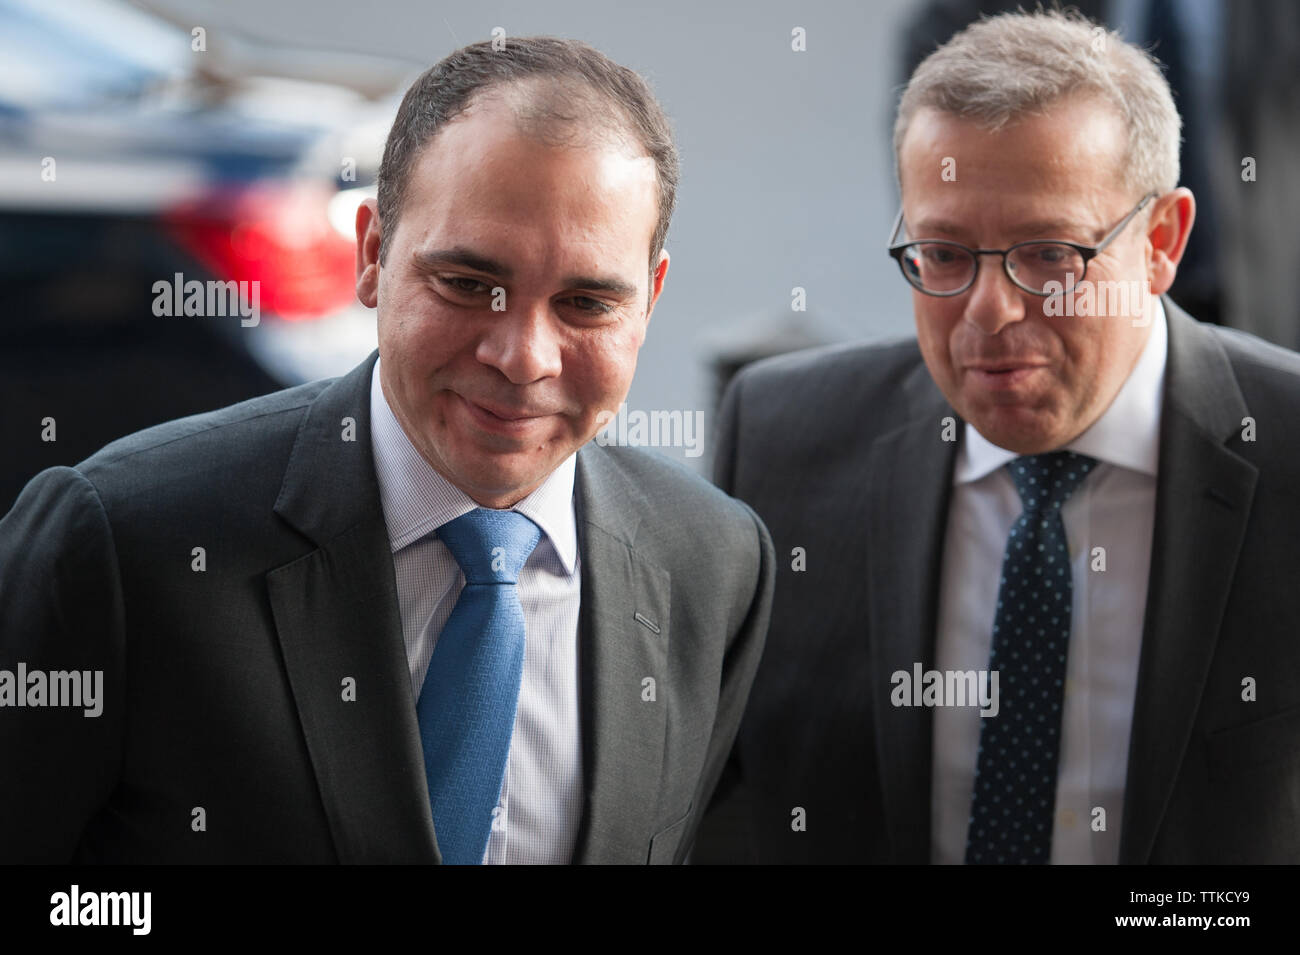 Portcullis House, Westminster, London, UK. 5th January, 2016. Fifa presidential candidate Prince Ali bin al-Hussein arrives at Portcullis House in cen Stock Photo